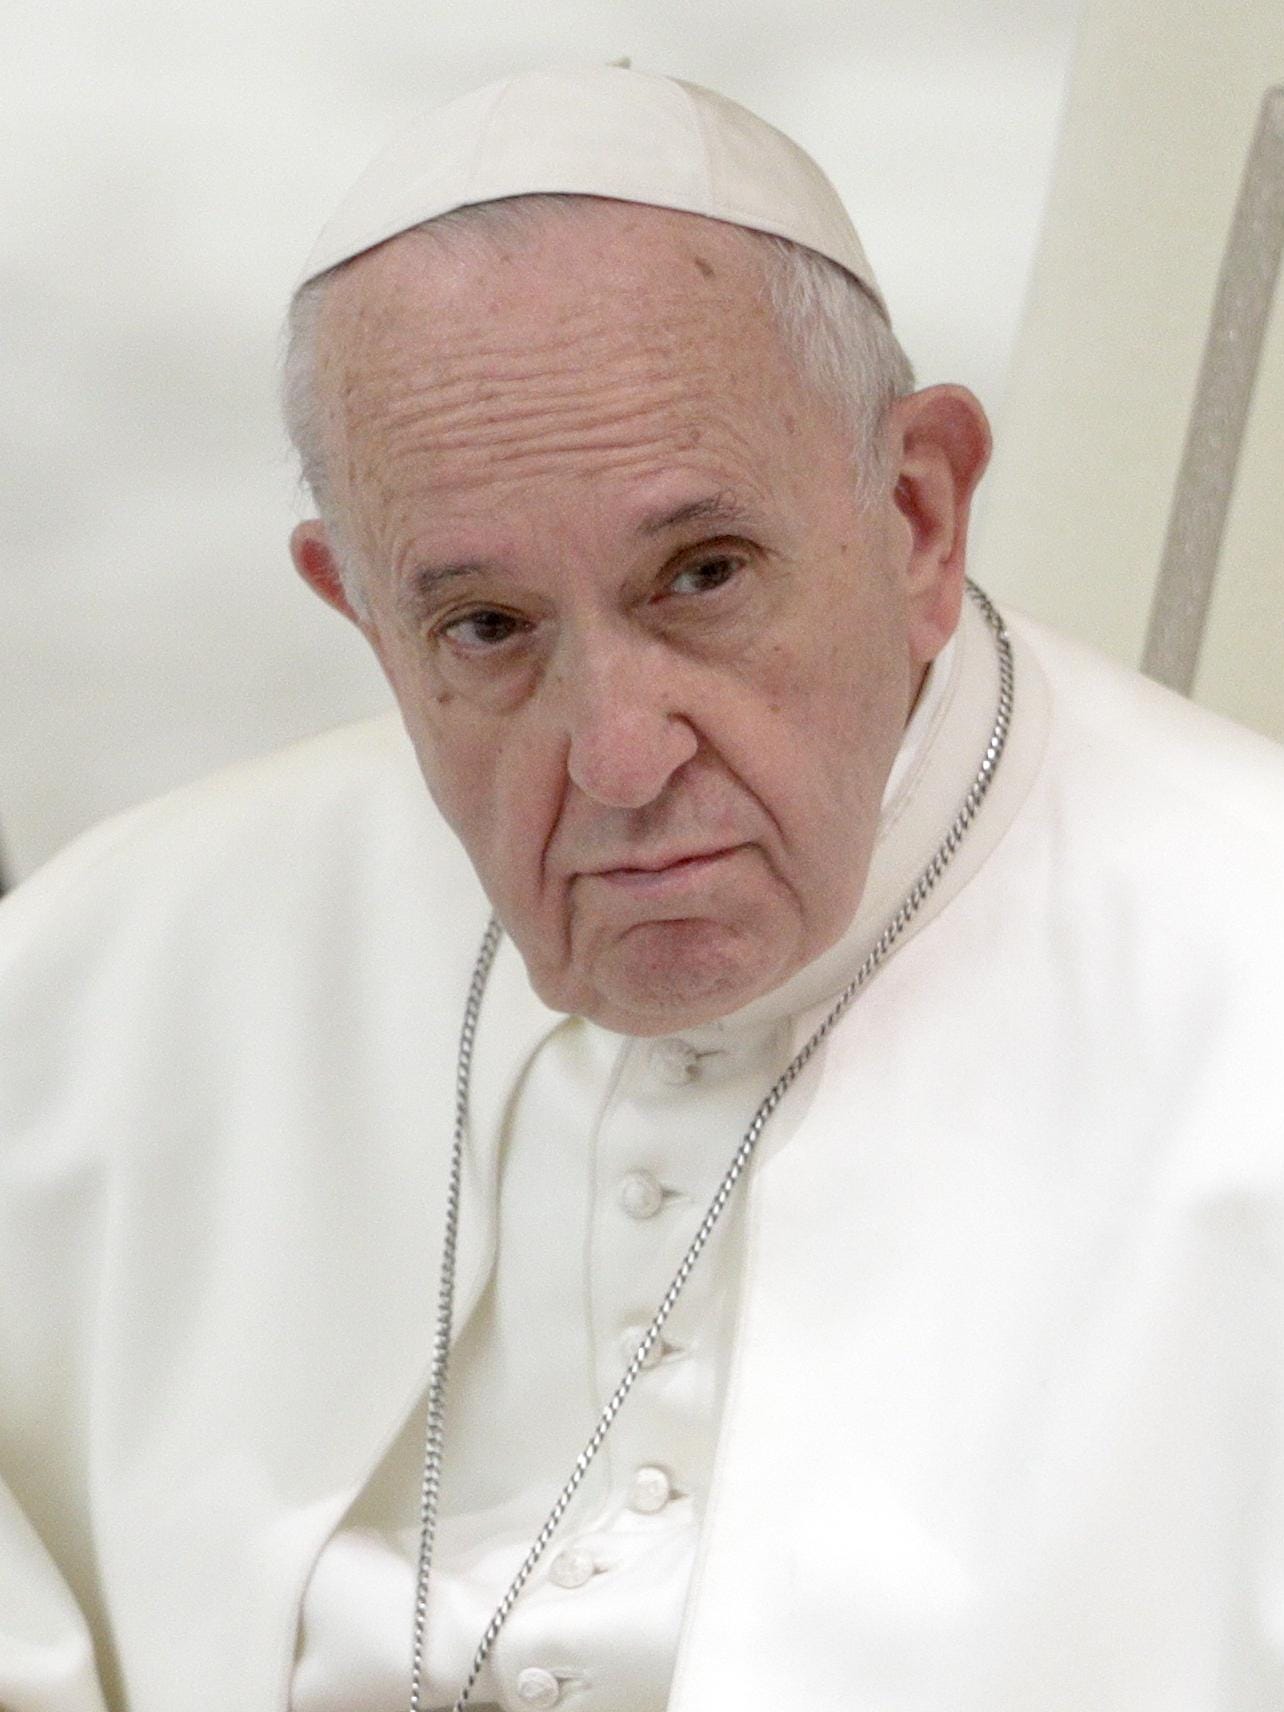 Pope Francis on Friday issued sweeping new sex abuse legislation for Vatican personnel and Holy See diplomats that requires the immediate reporting of abuse allegations to Vatican prosecutors.